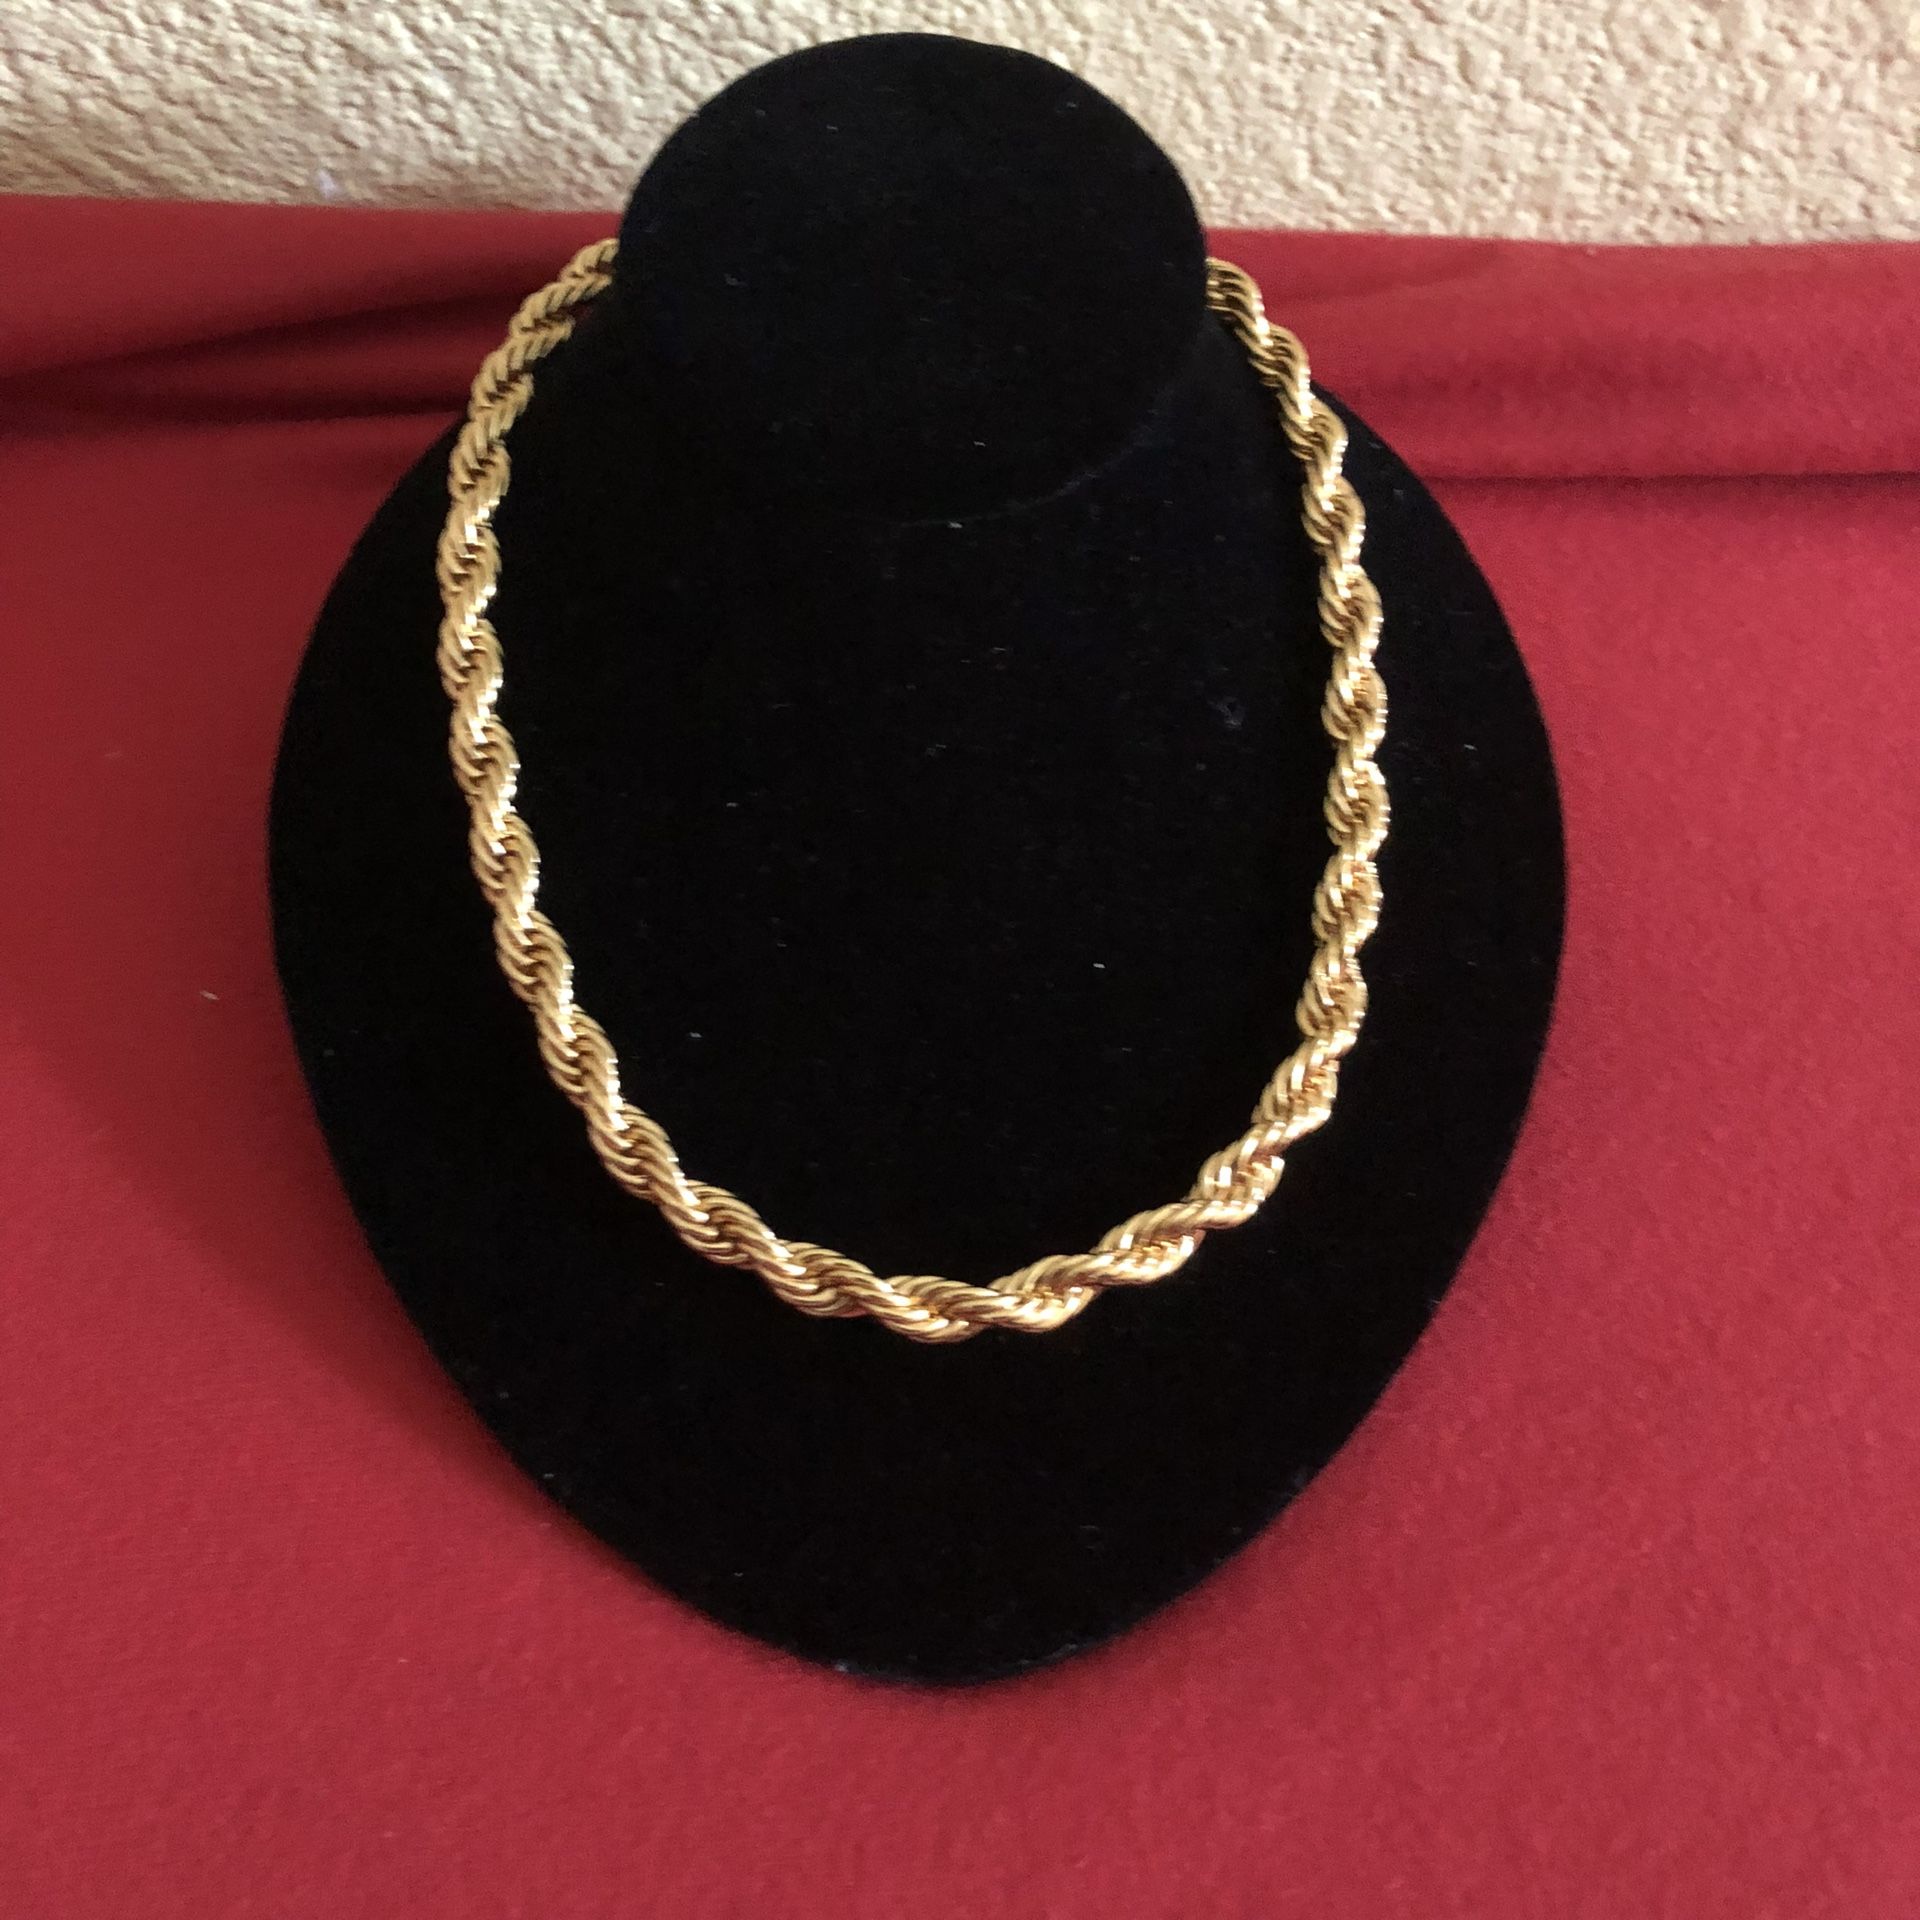 Brand New 24” Stainless Steel Rope chain necklace gold color.